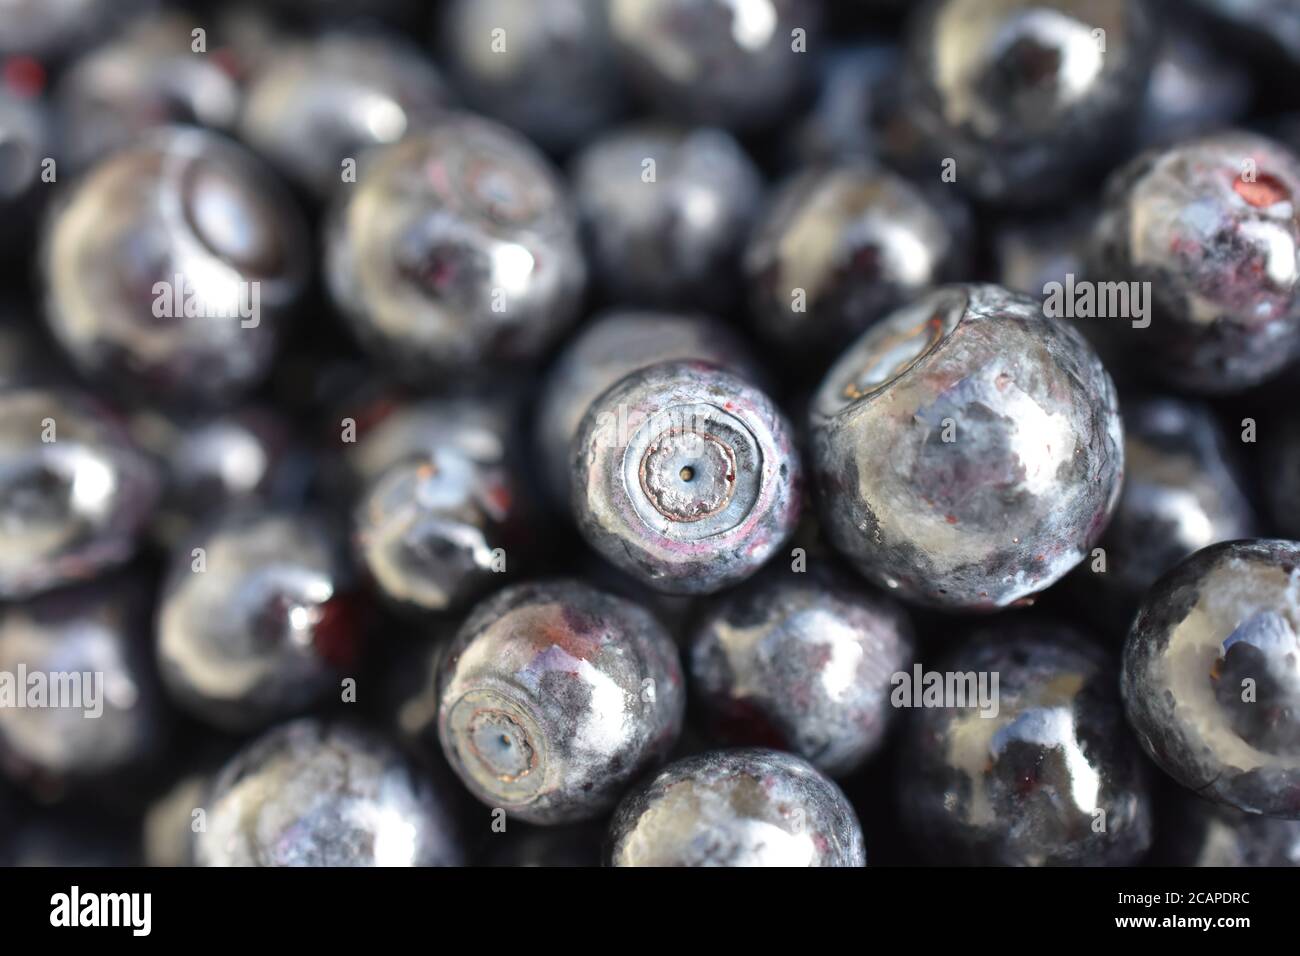 Extreme closeup on group of ripe blueberries Stock Photo